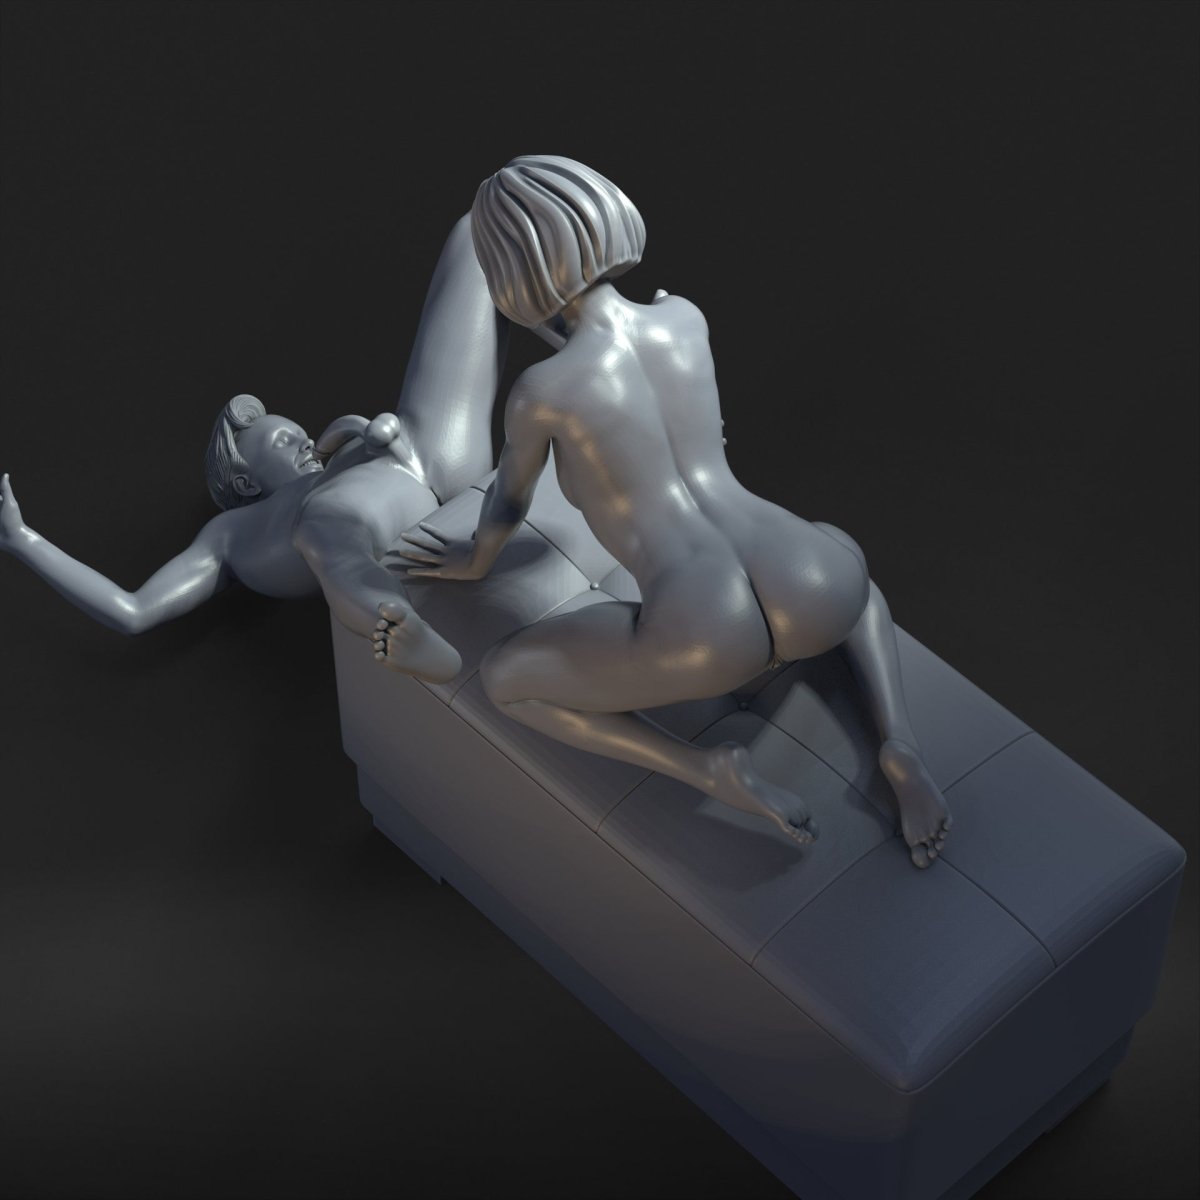 Couple 23 Mature 3d Printed miniature FanArt by Masters Of Prints Collectables Statues & Figurines